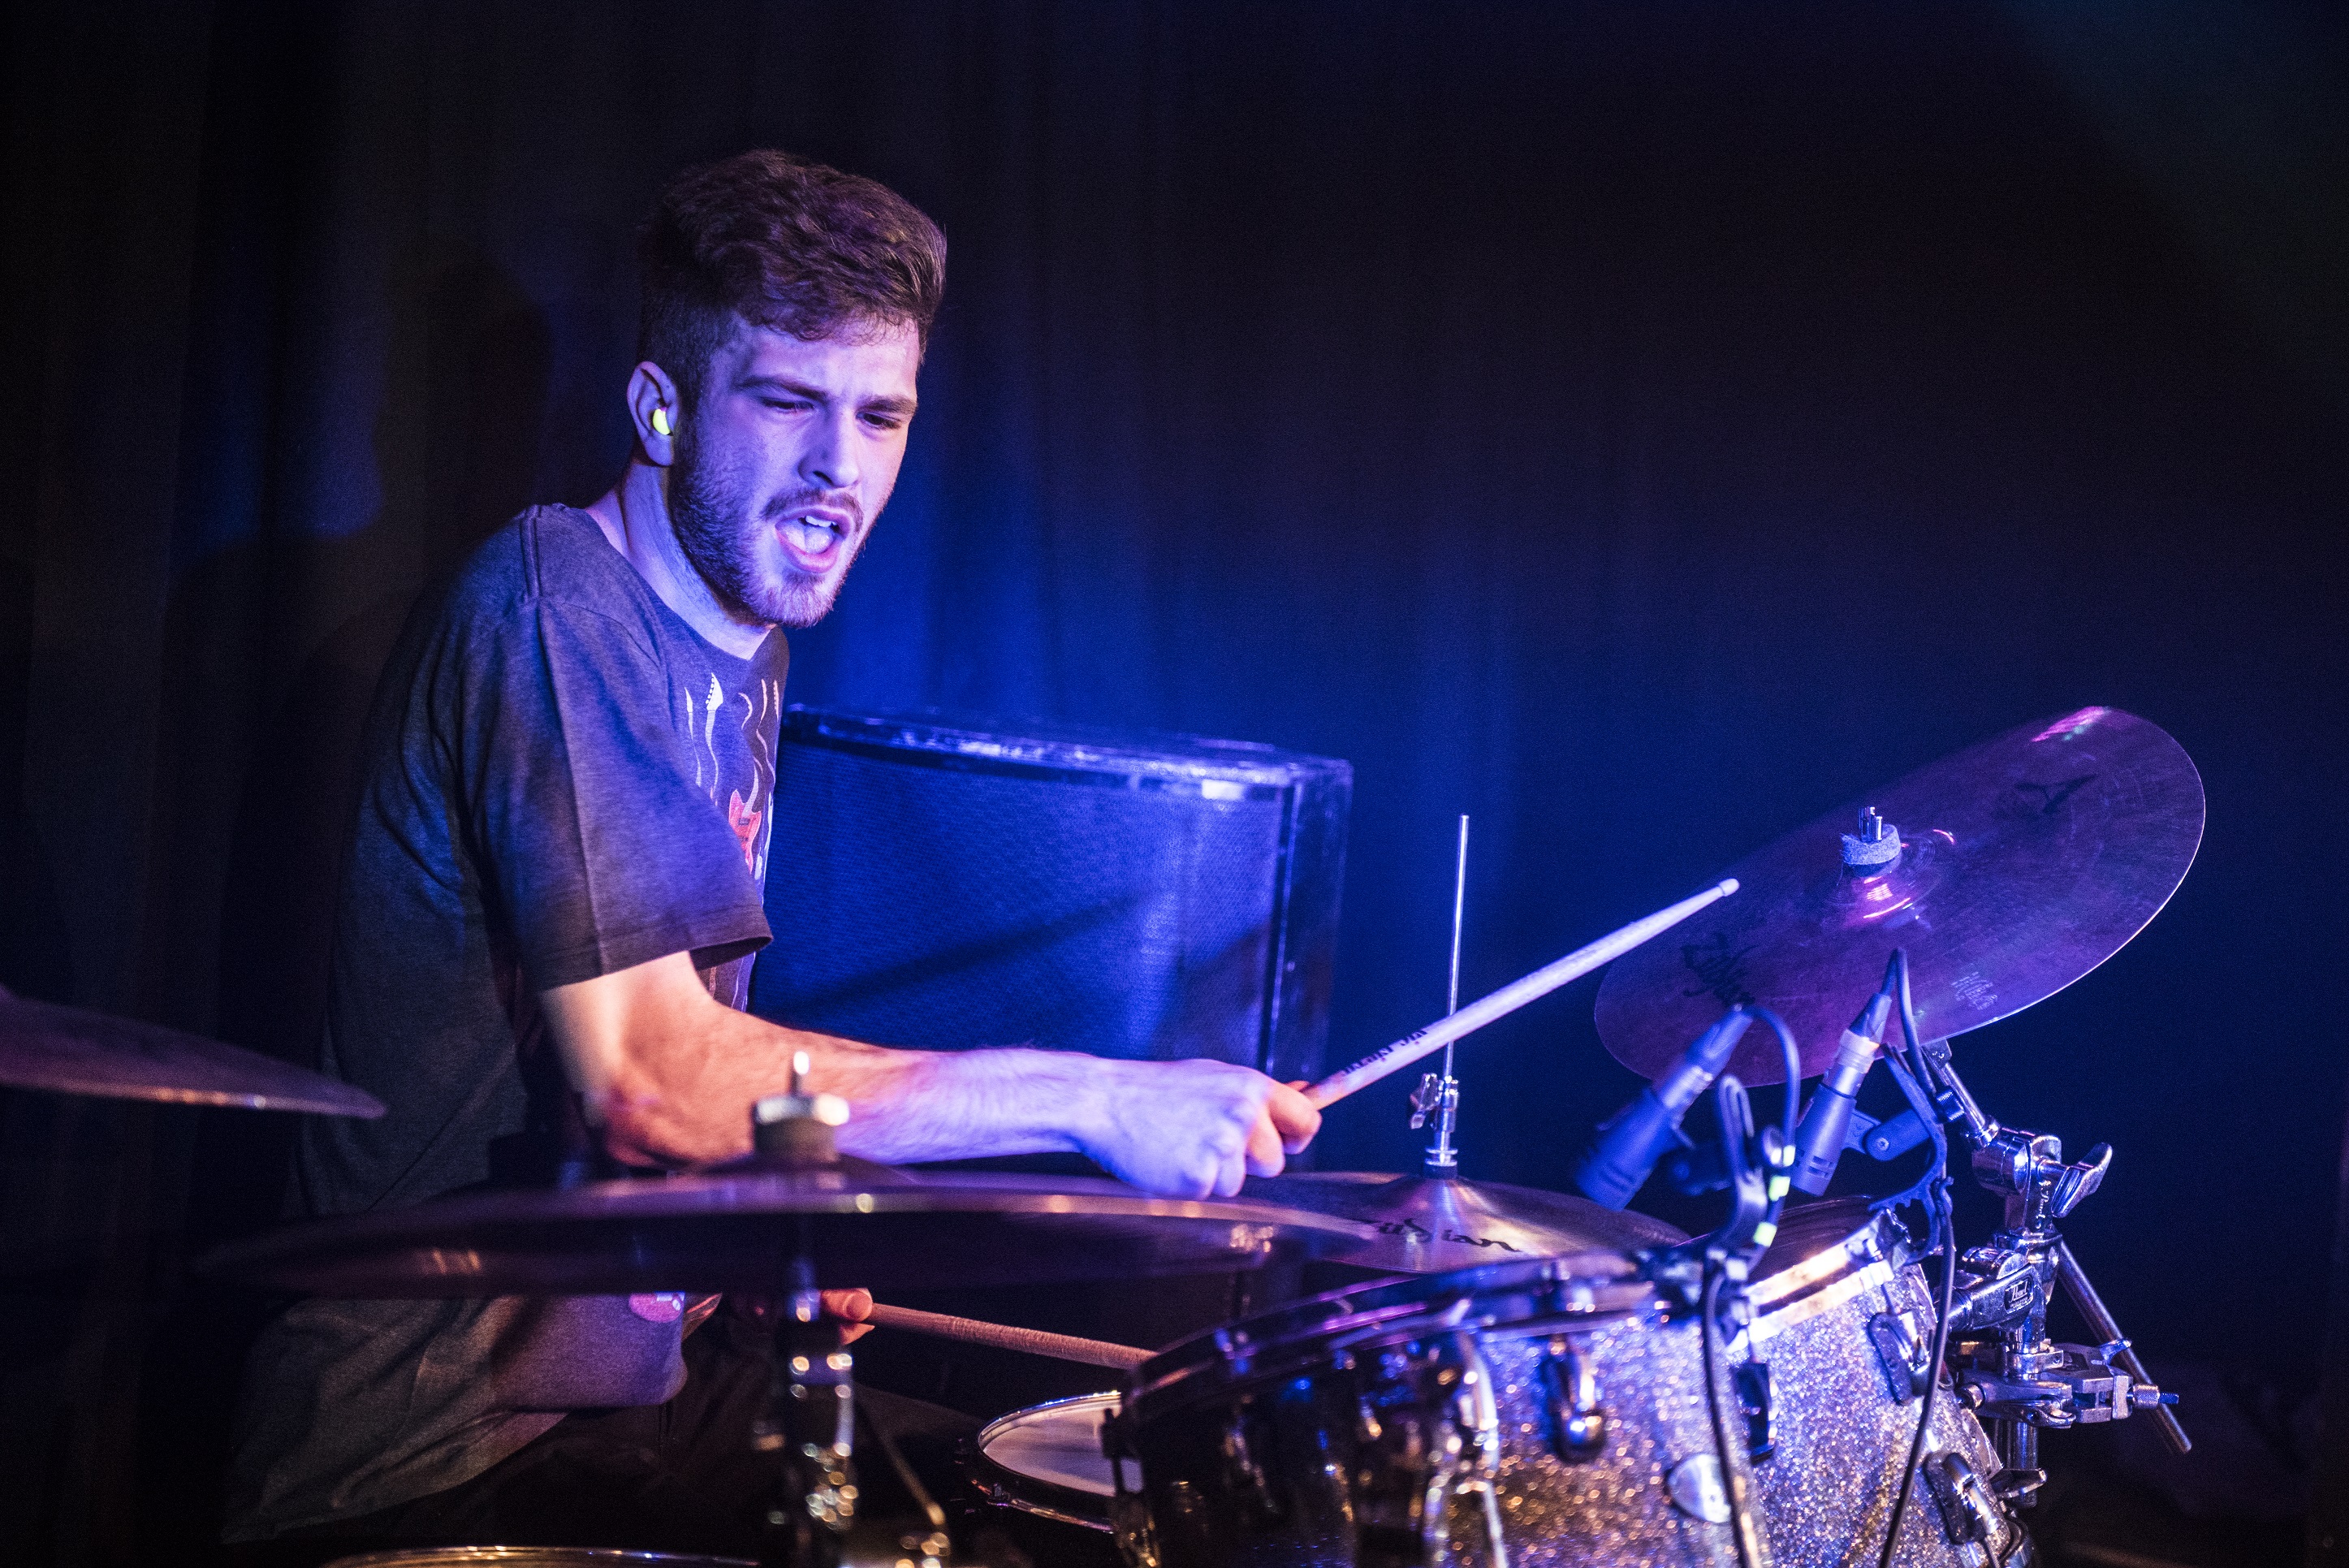 Man playing the drums under a blue light